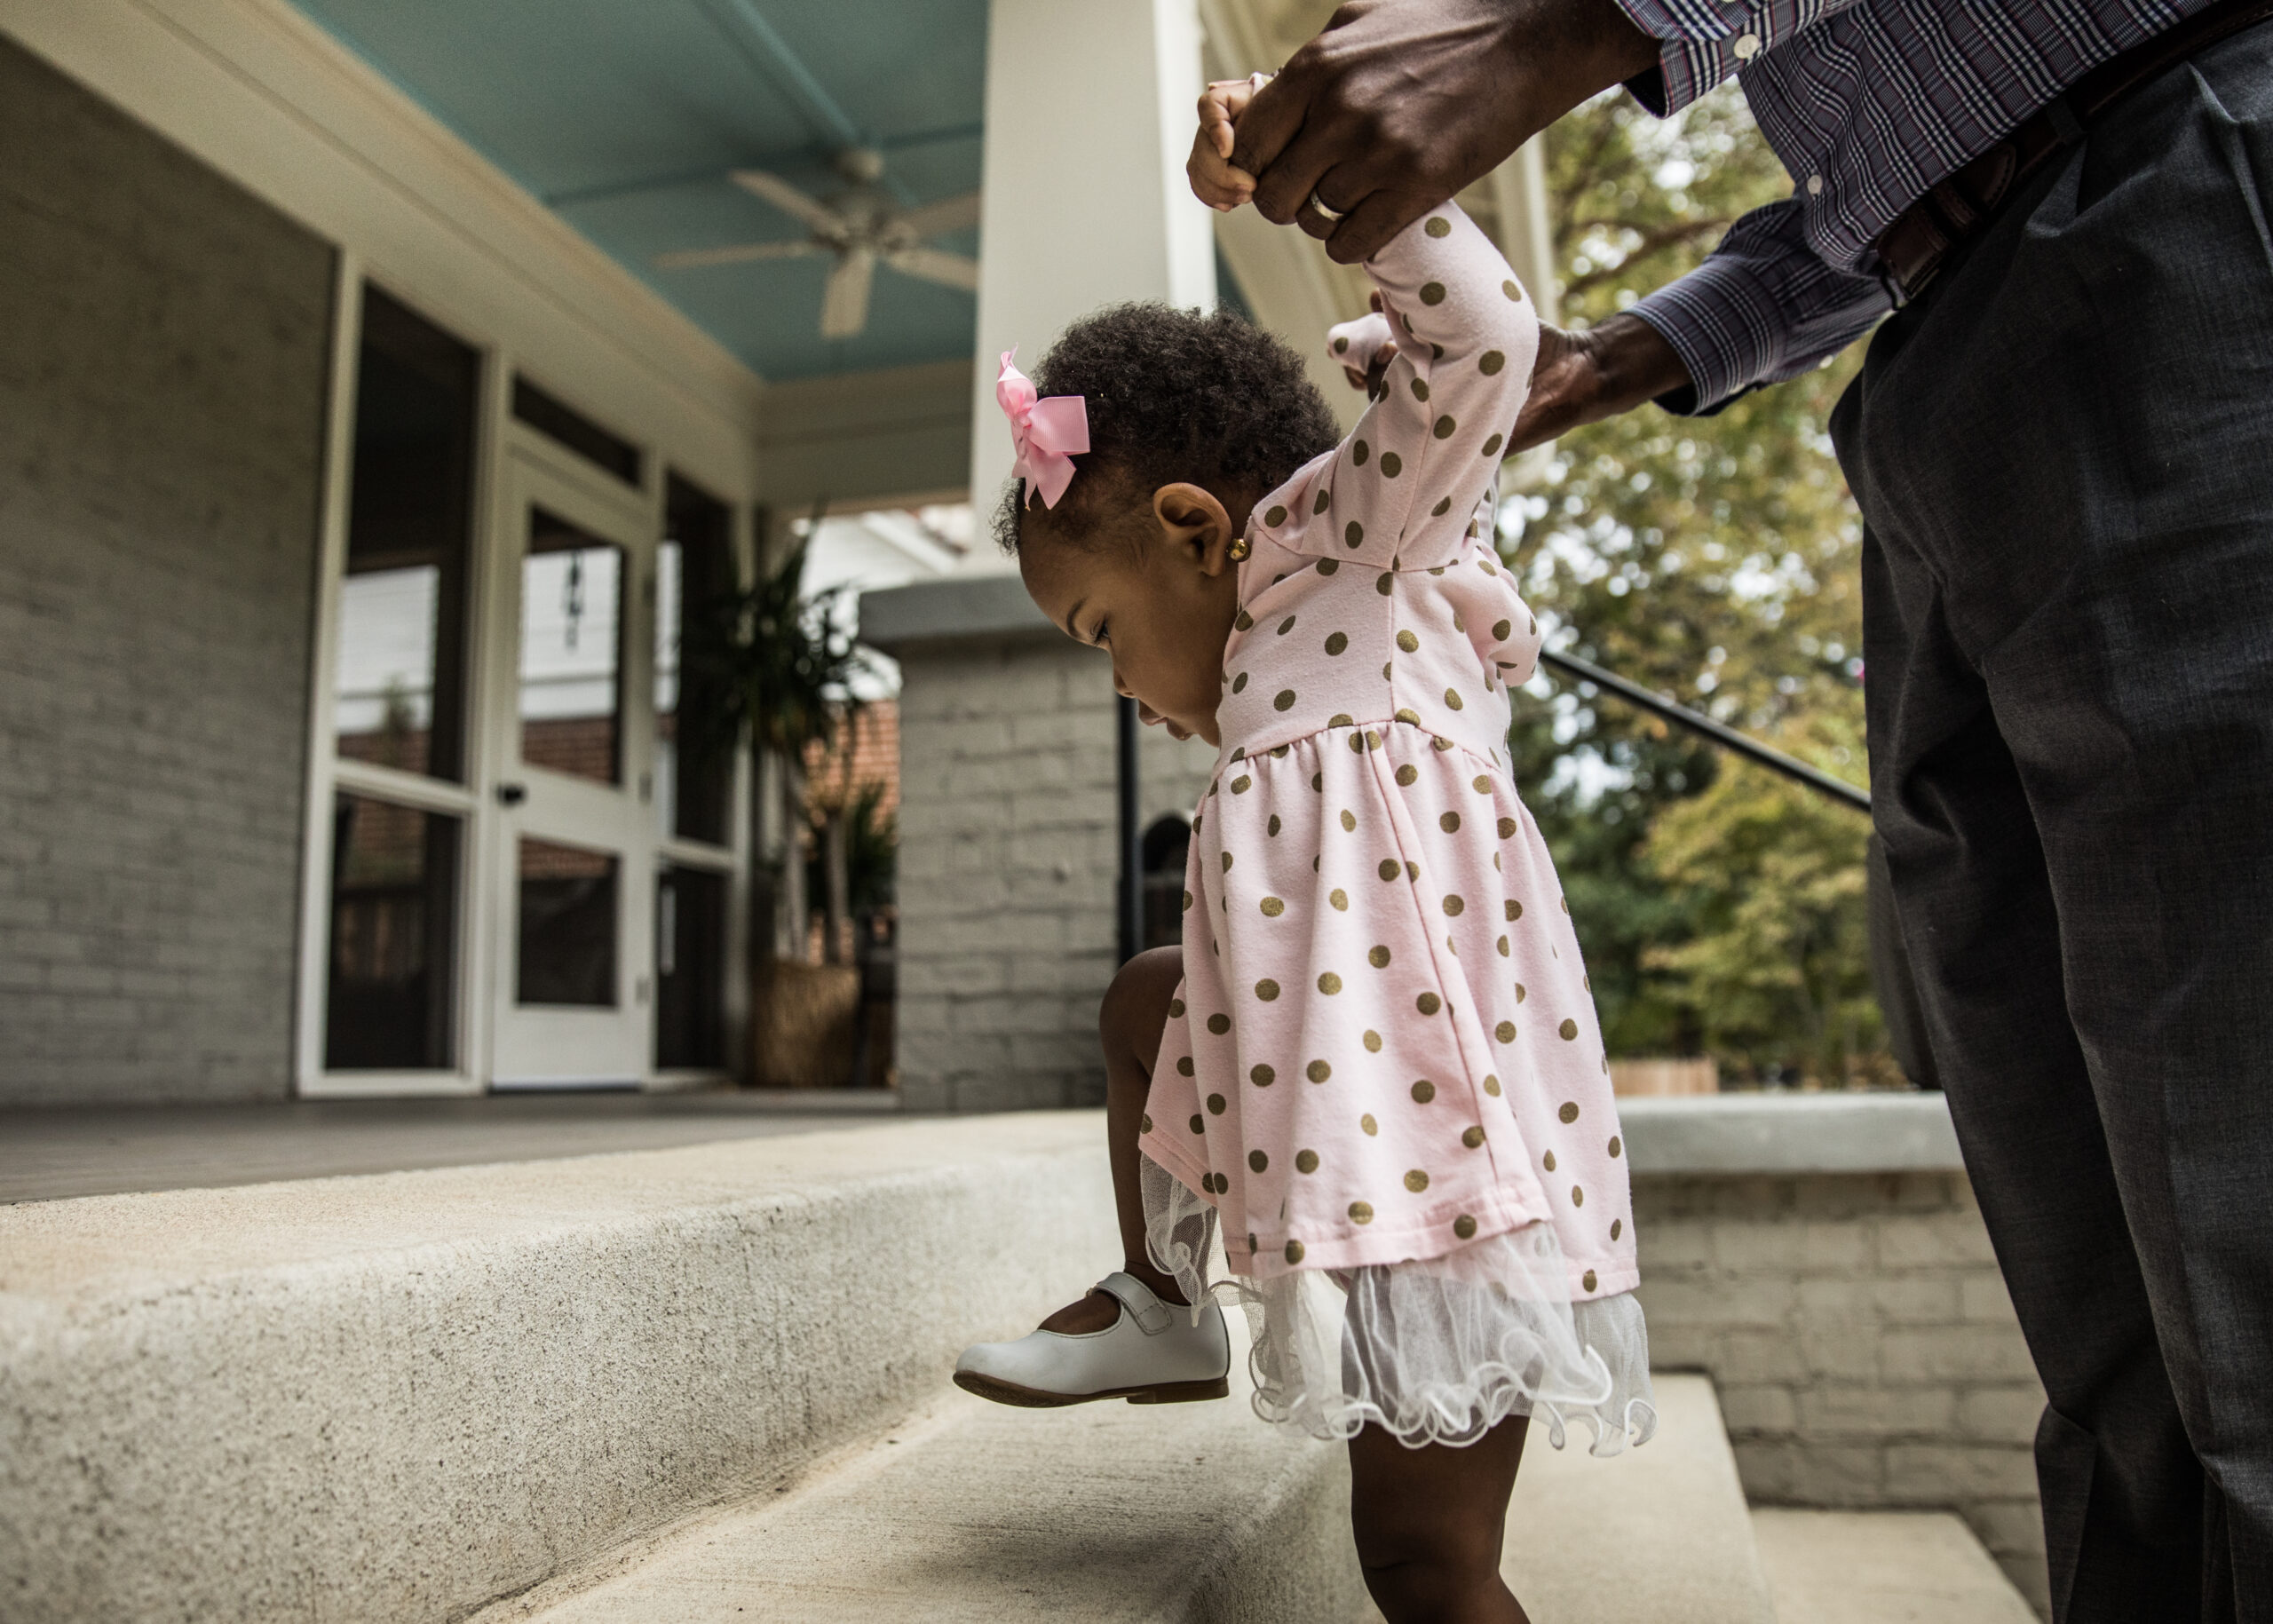 The Foster Care To Prison Pipeline: Sentencing and Criminalization of Black Girls